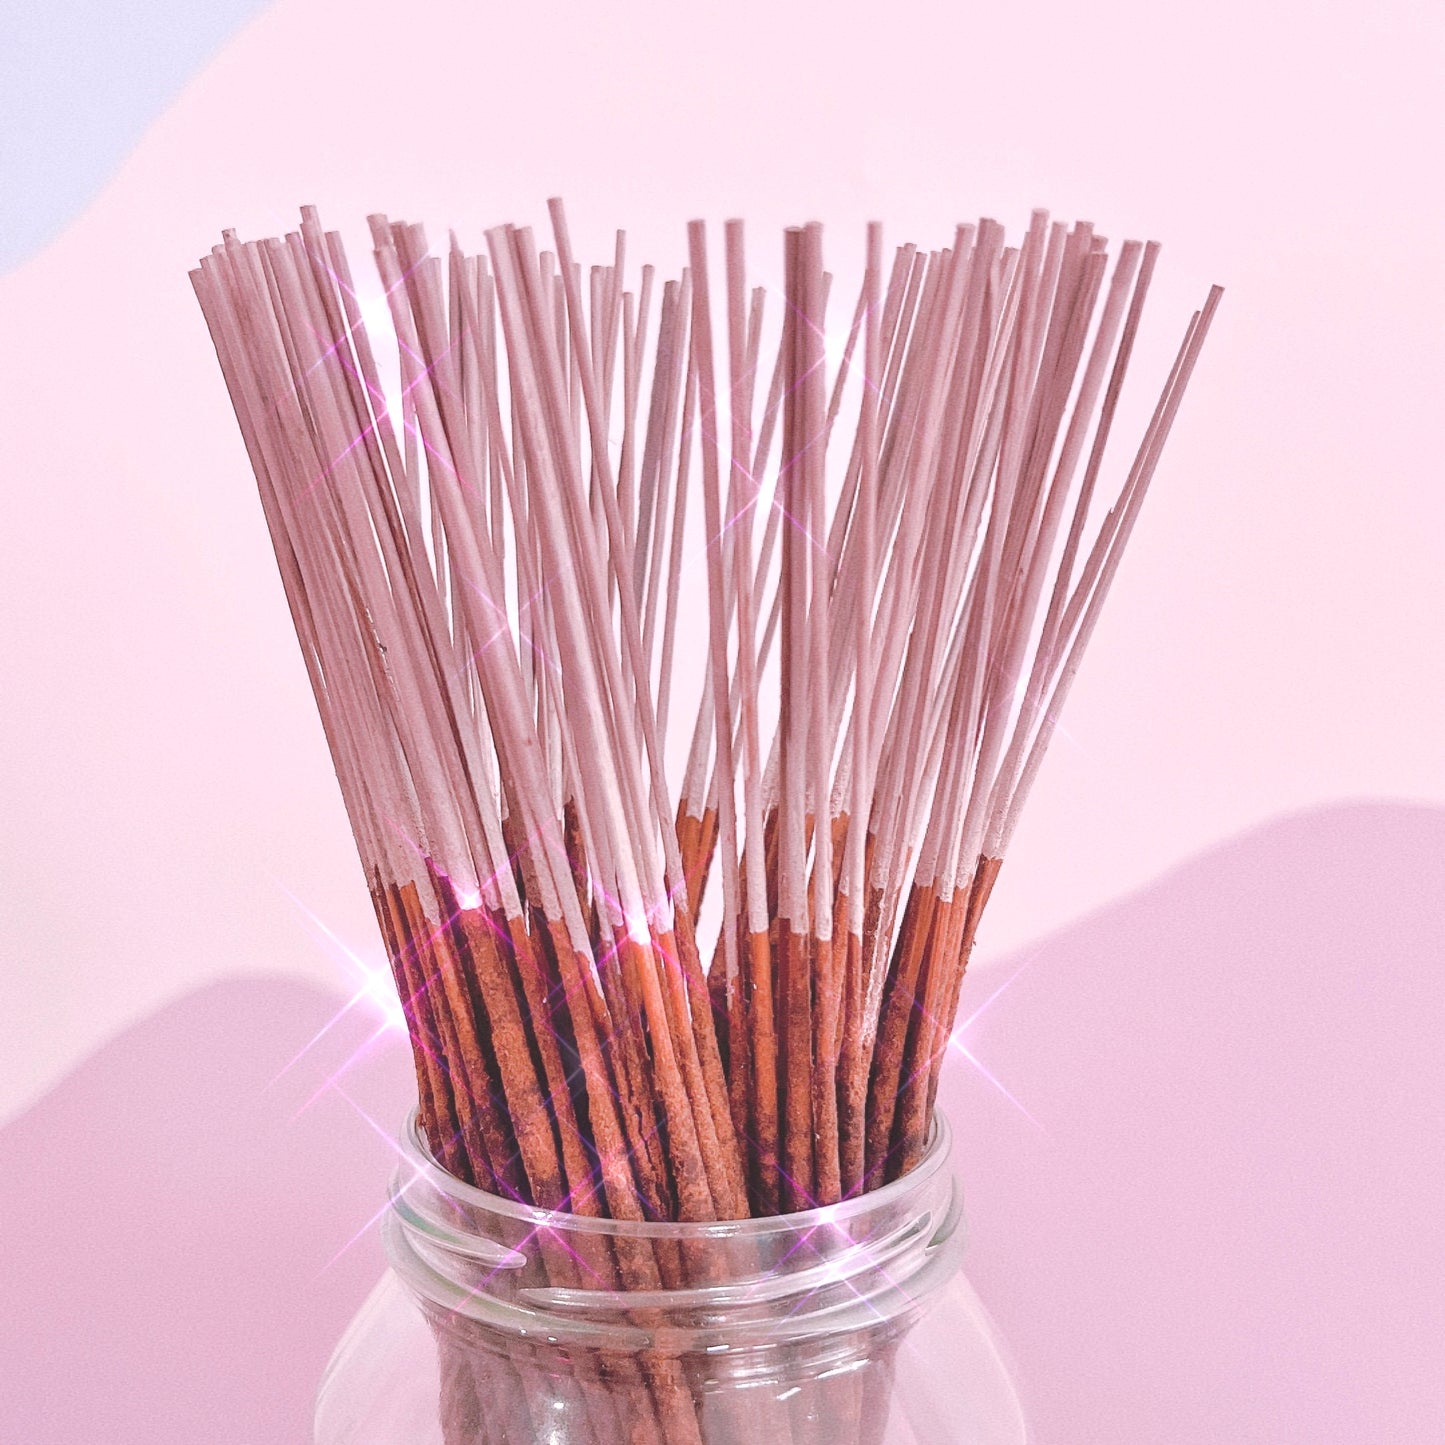 Wild Berry Incense Stick - Baking Brownies